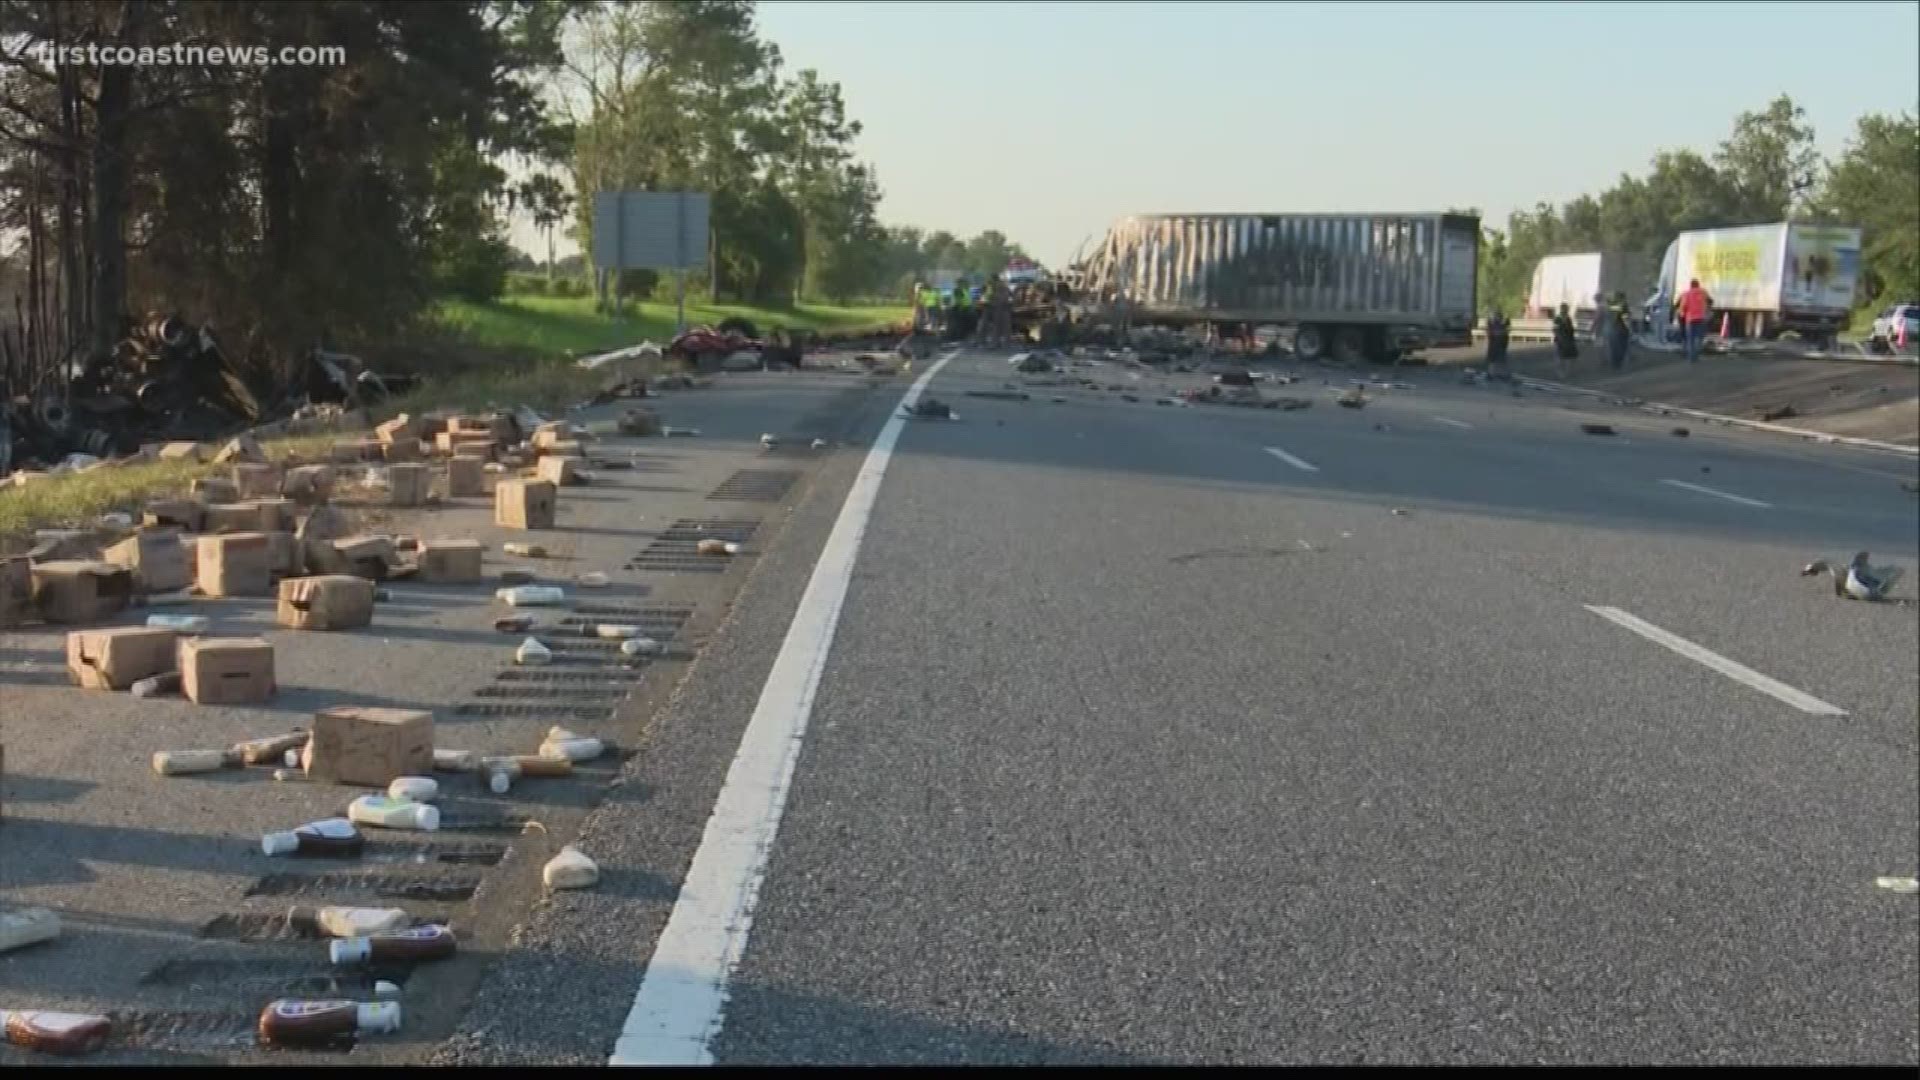 Florida Highway Patrol says the crash, which happened near Mile Maker 413, involved three semi-trailers and an SUV.